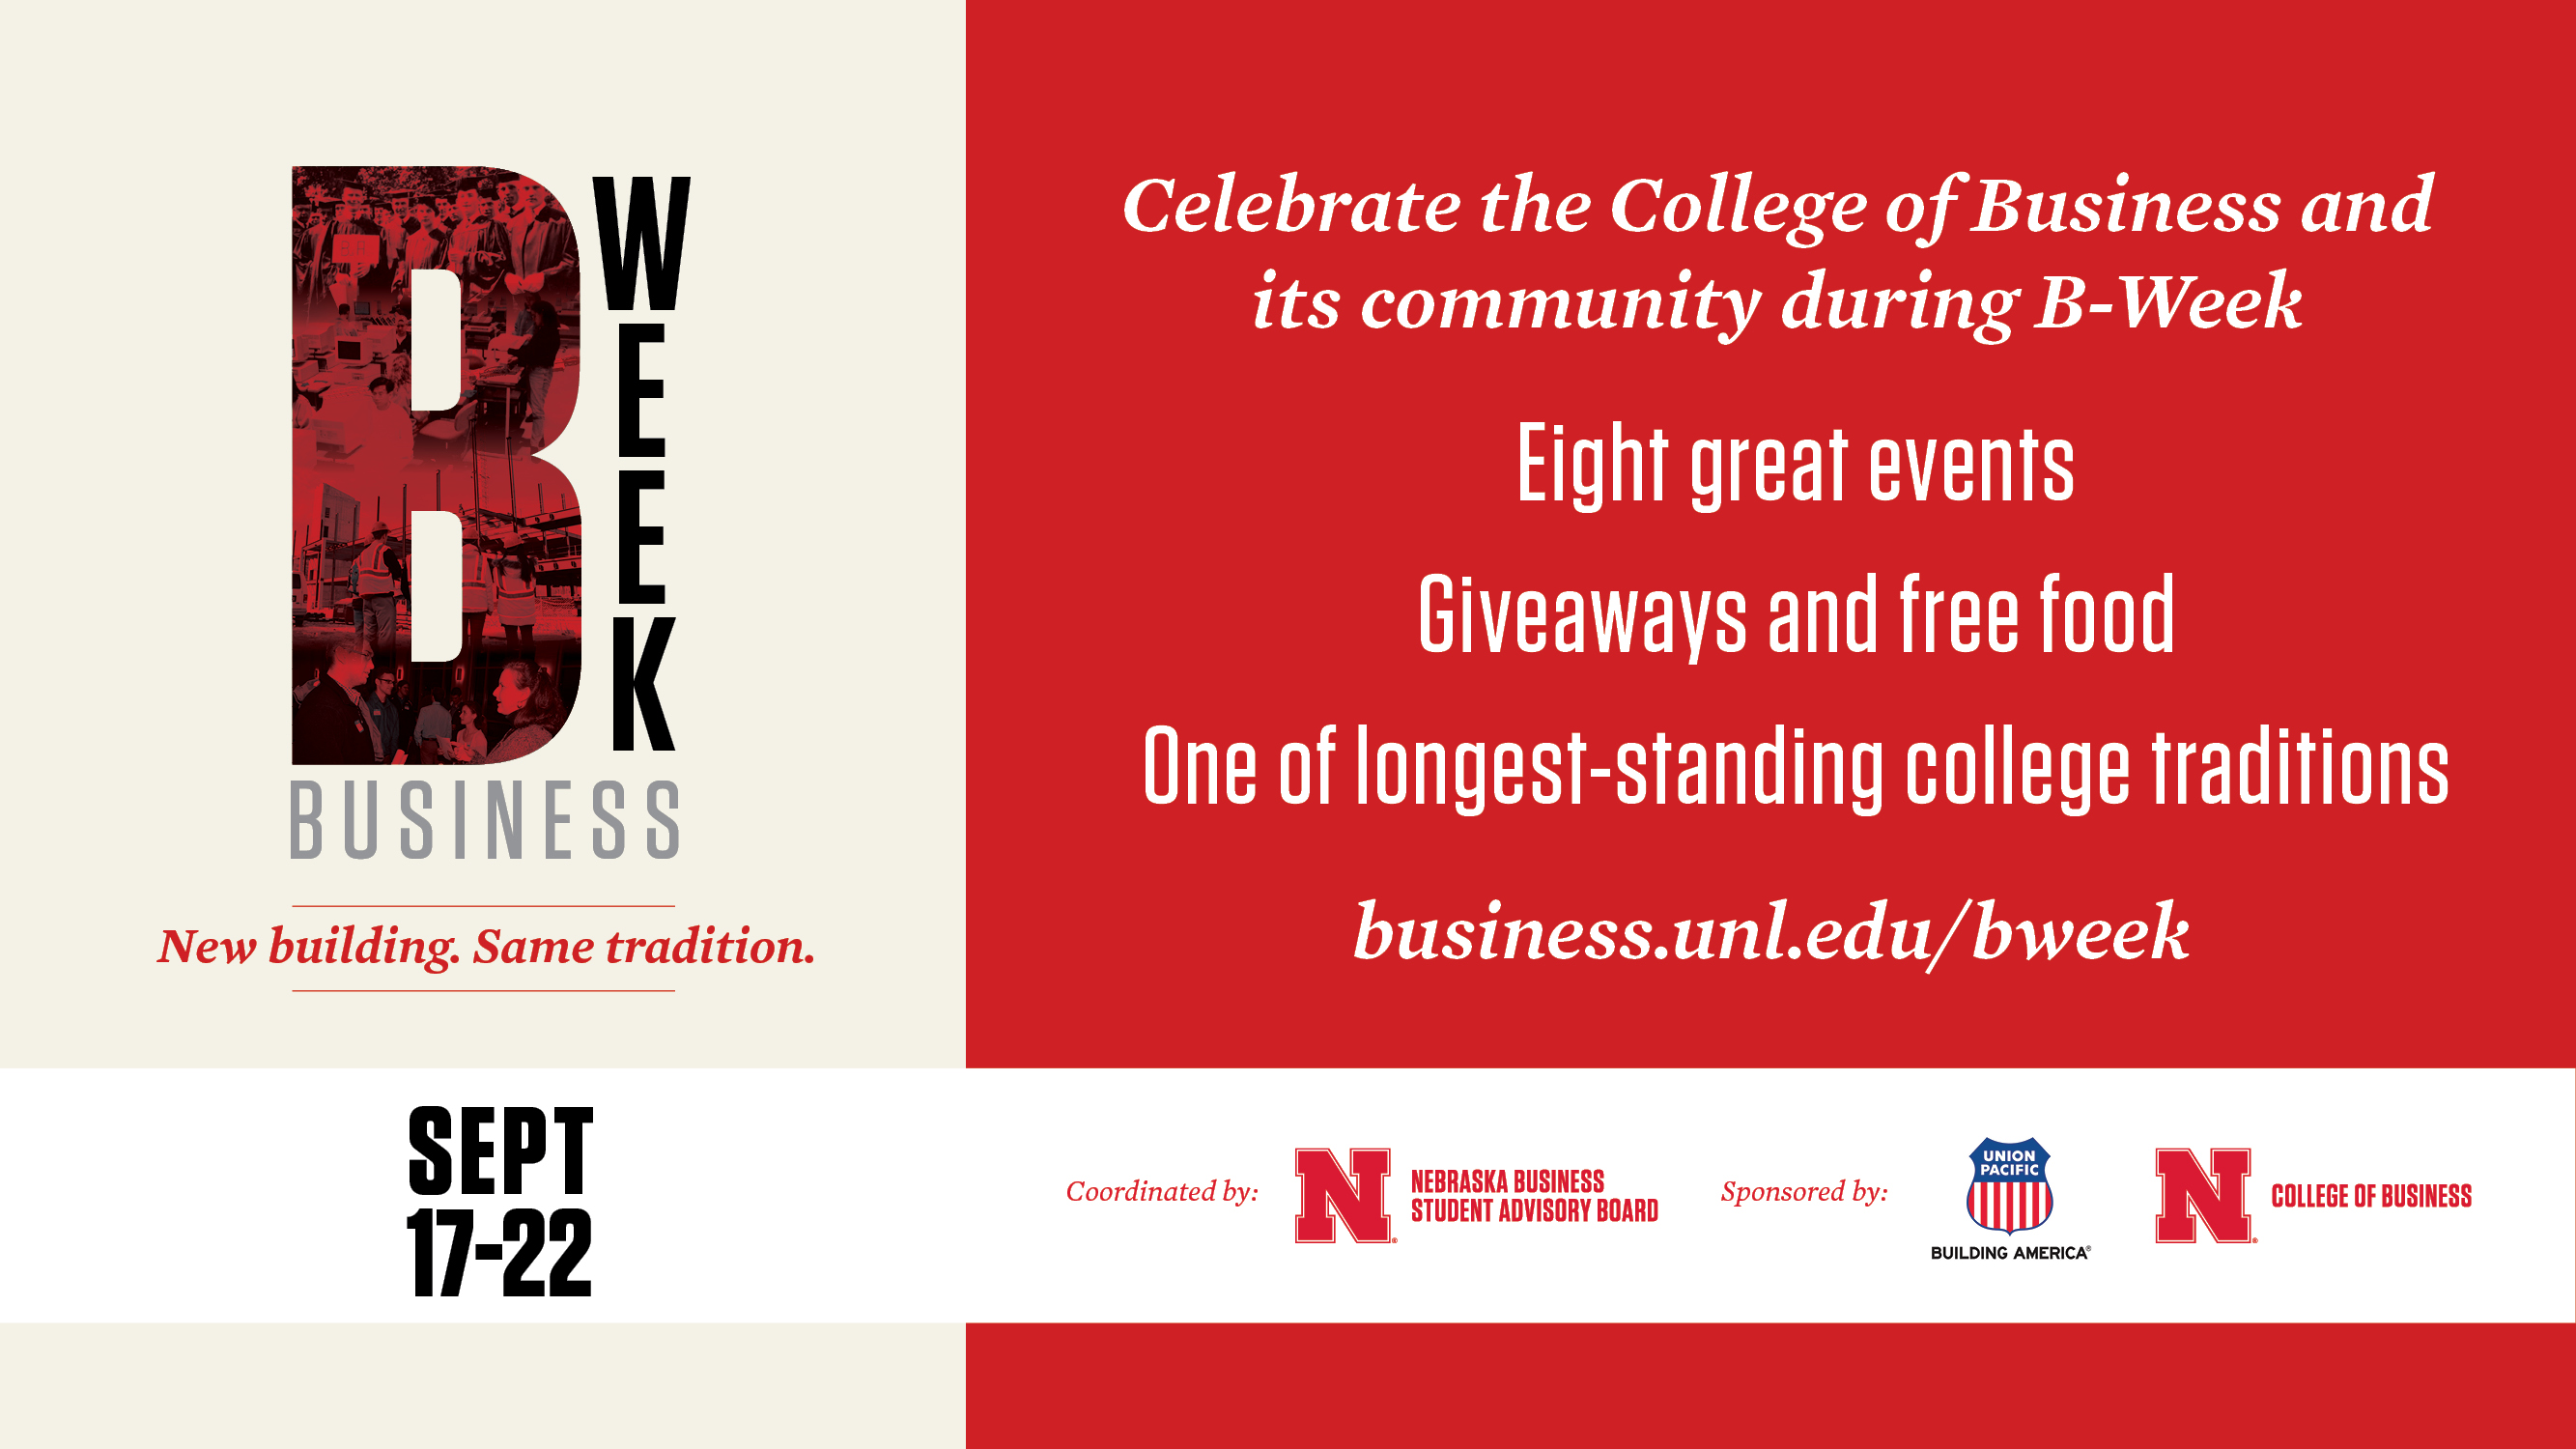 B-Week is one of the College of Business longest-standing traditions.